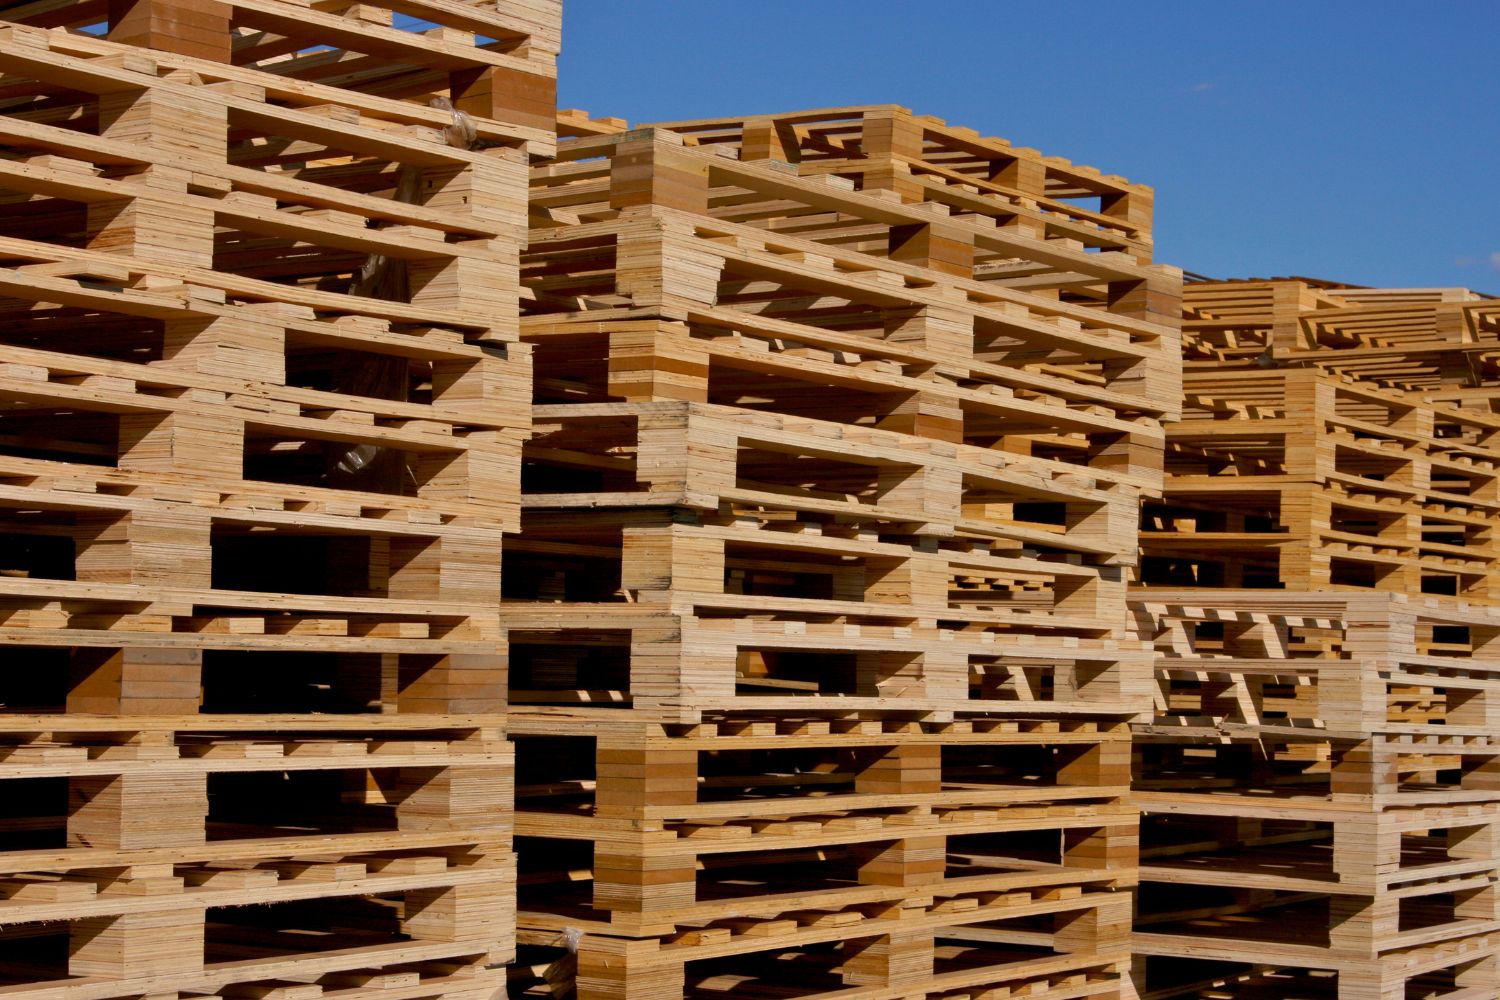 Reasons Why Timber or Wooden Pallets Are Still So Popular